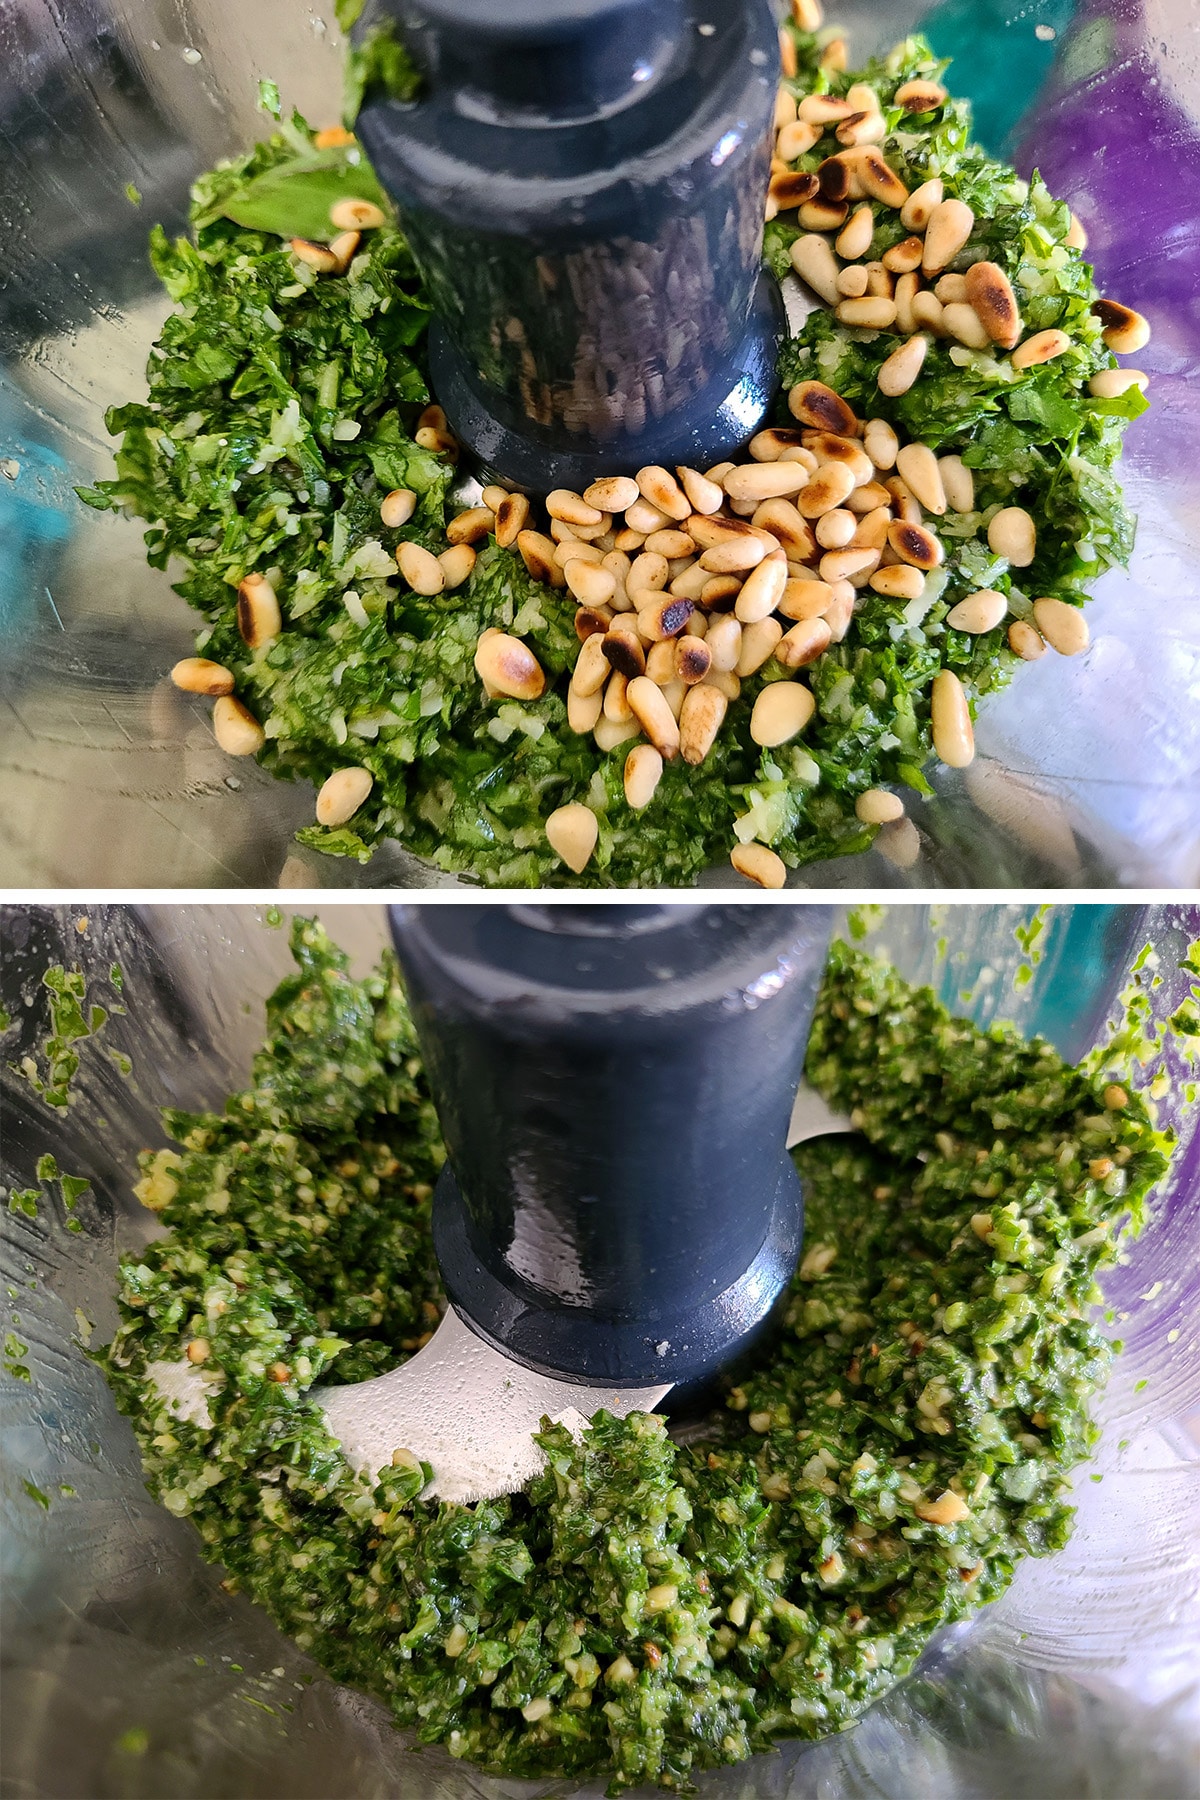 Pine nuts added to the food processor and chopped in.